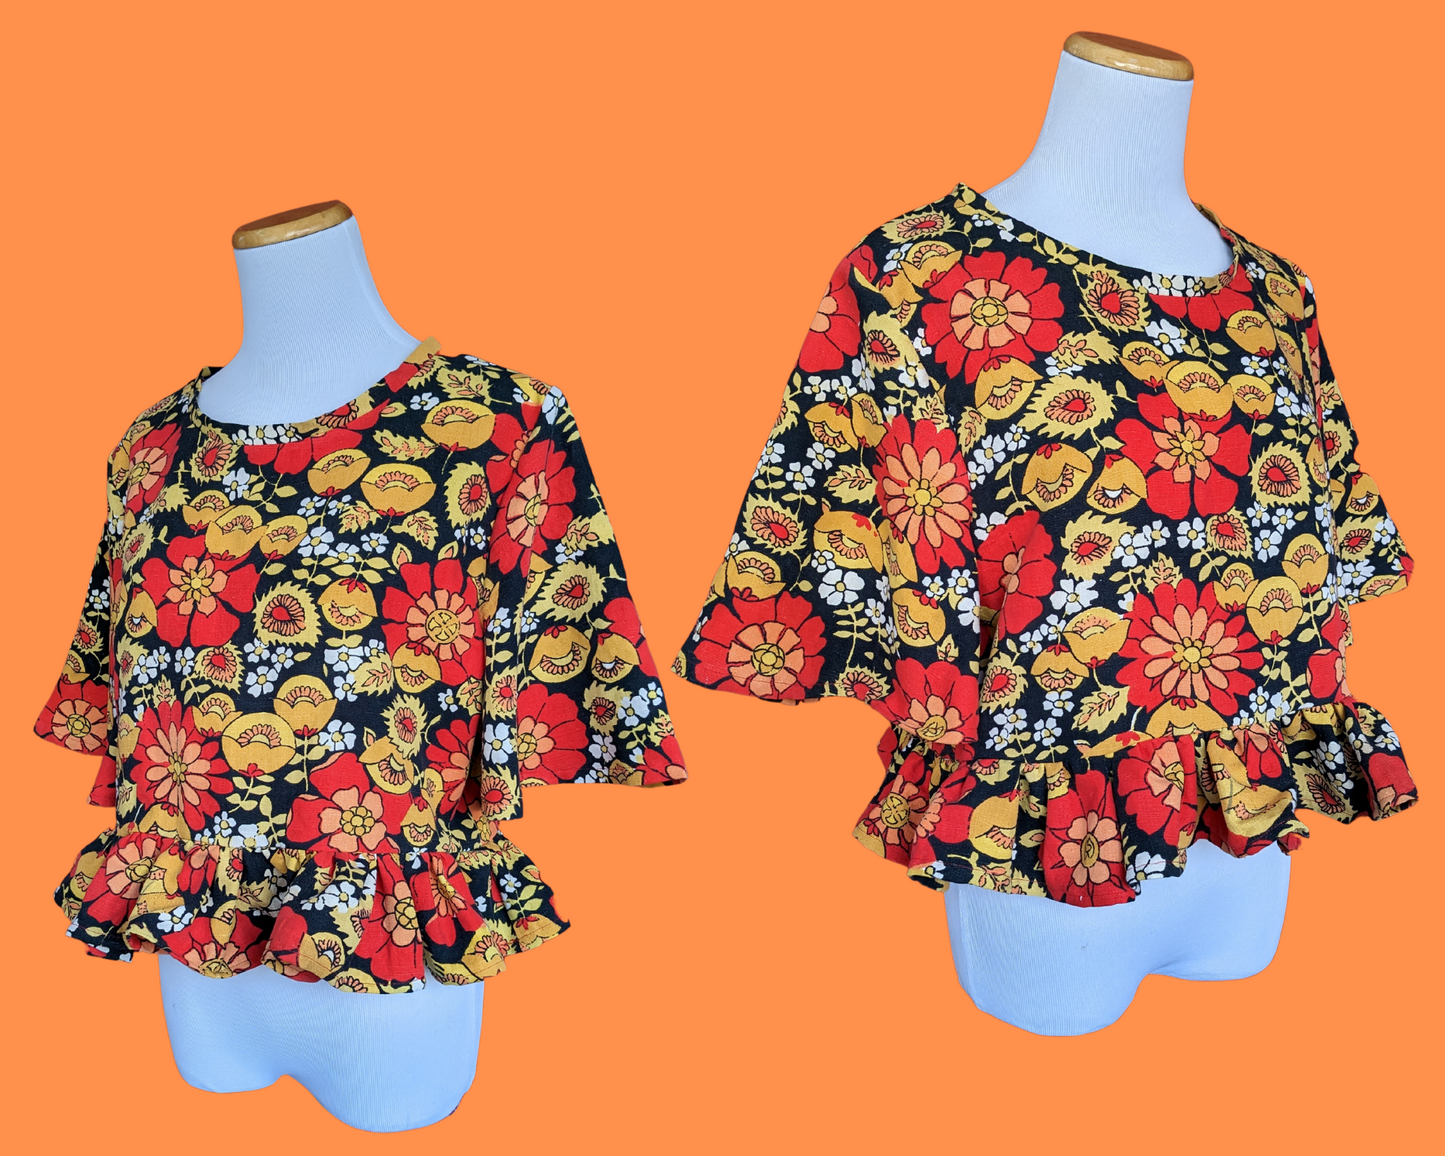 Handmade, Upcycled Vintage 1960's Floral Mod, Groovy Blouse Size M